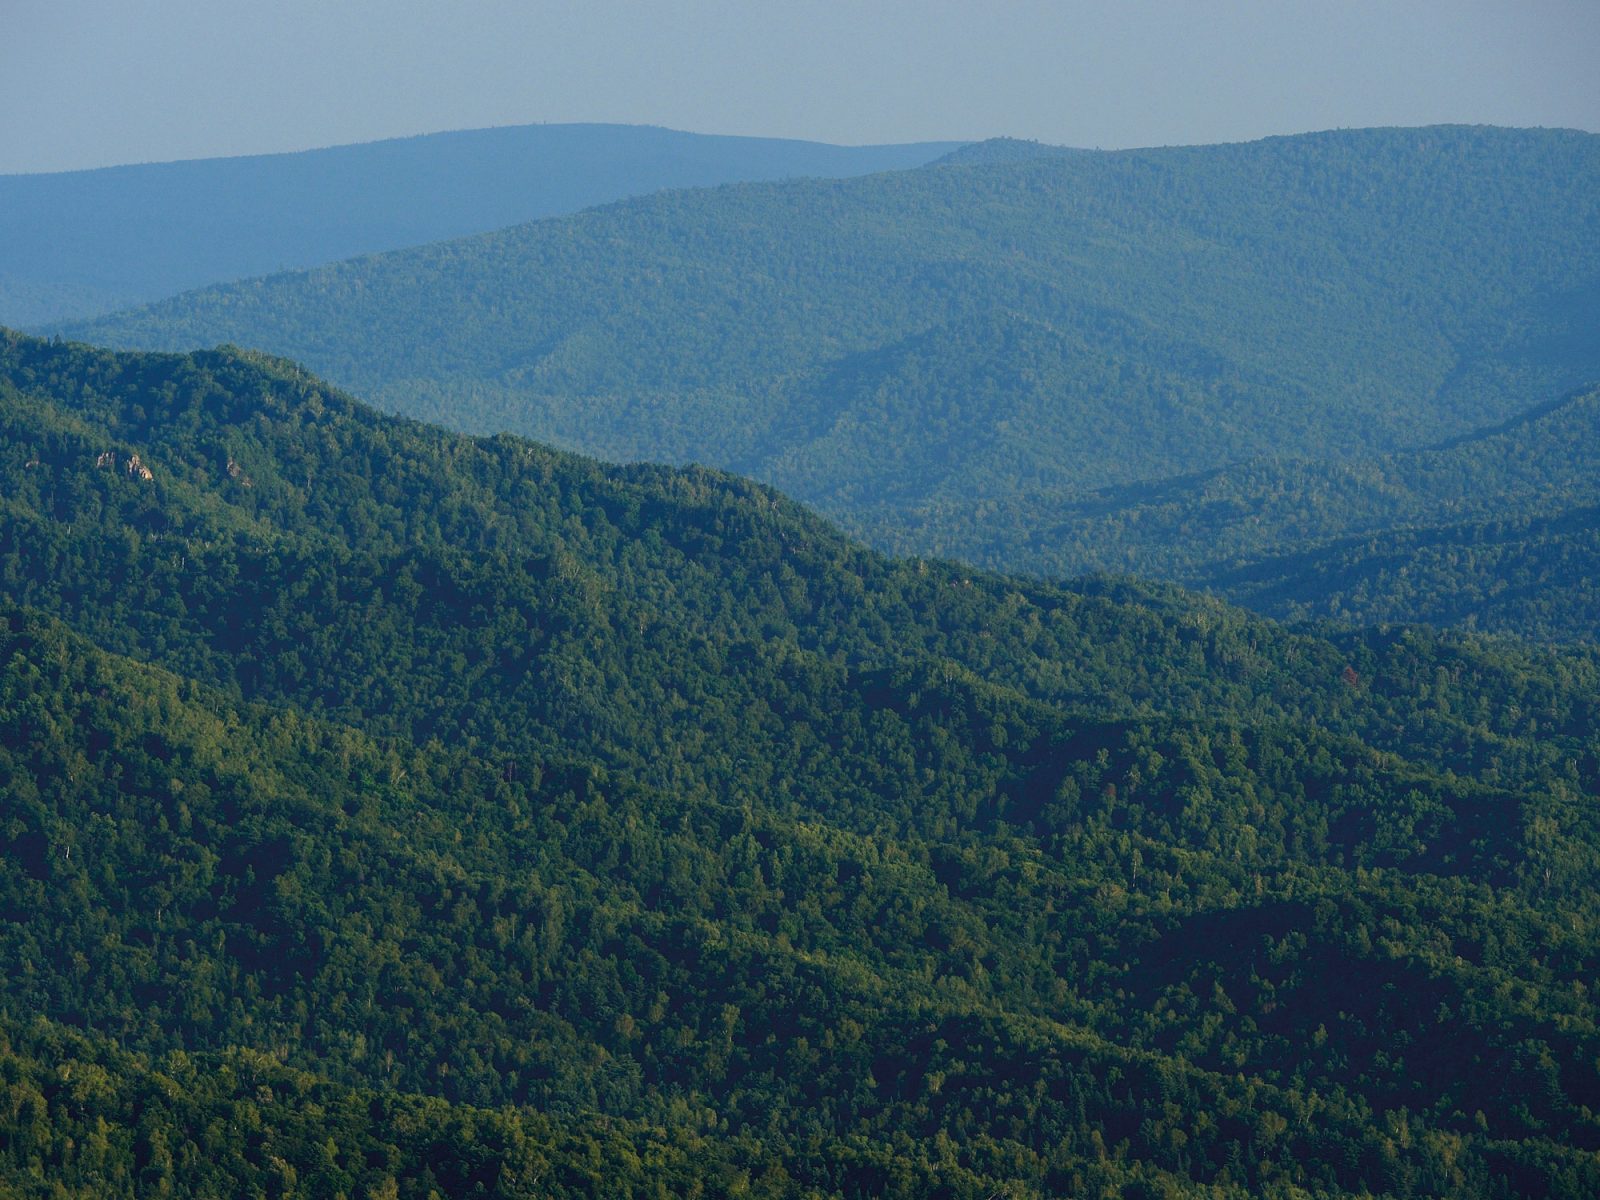 Extensive green forest area in hilly terrain.